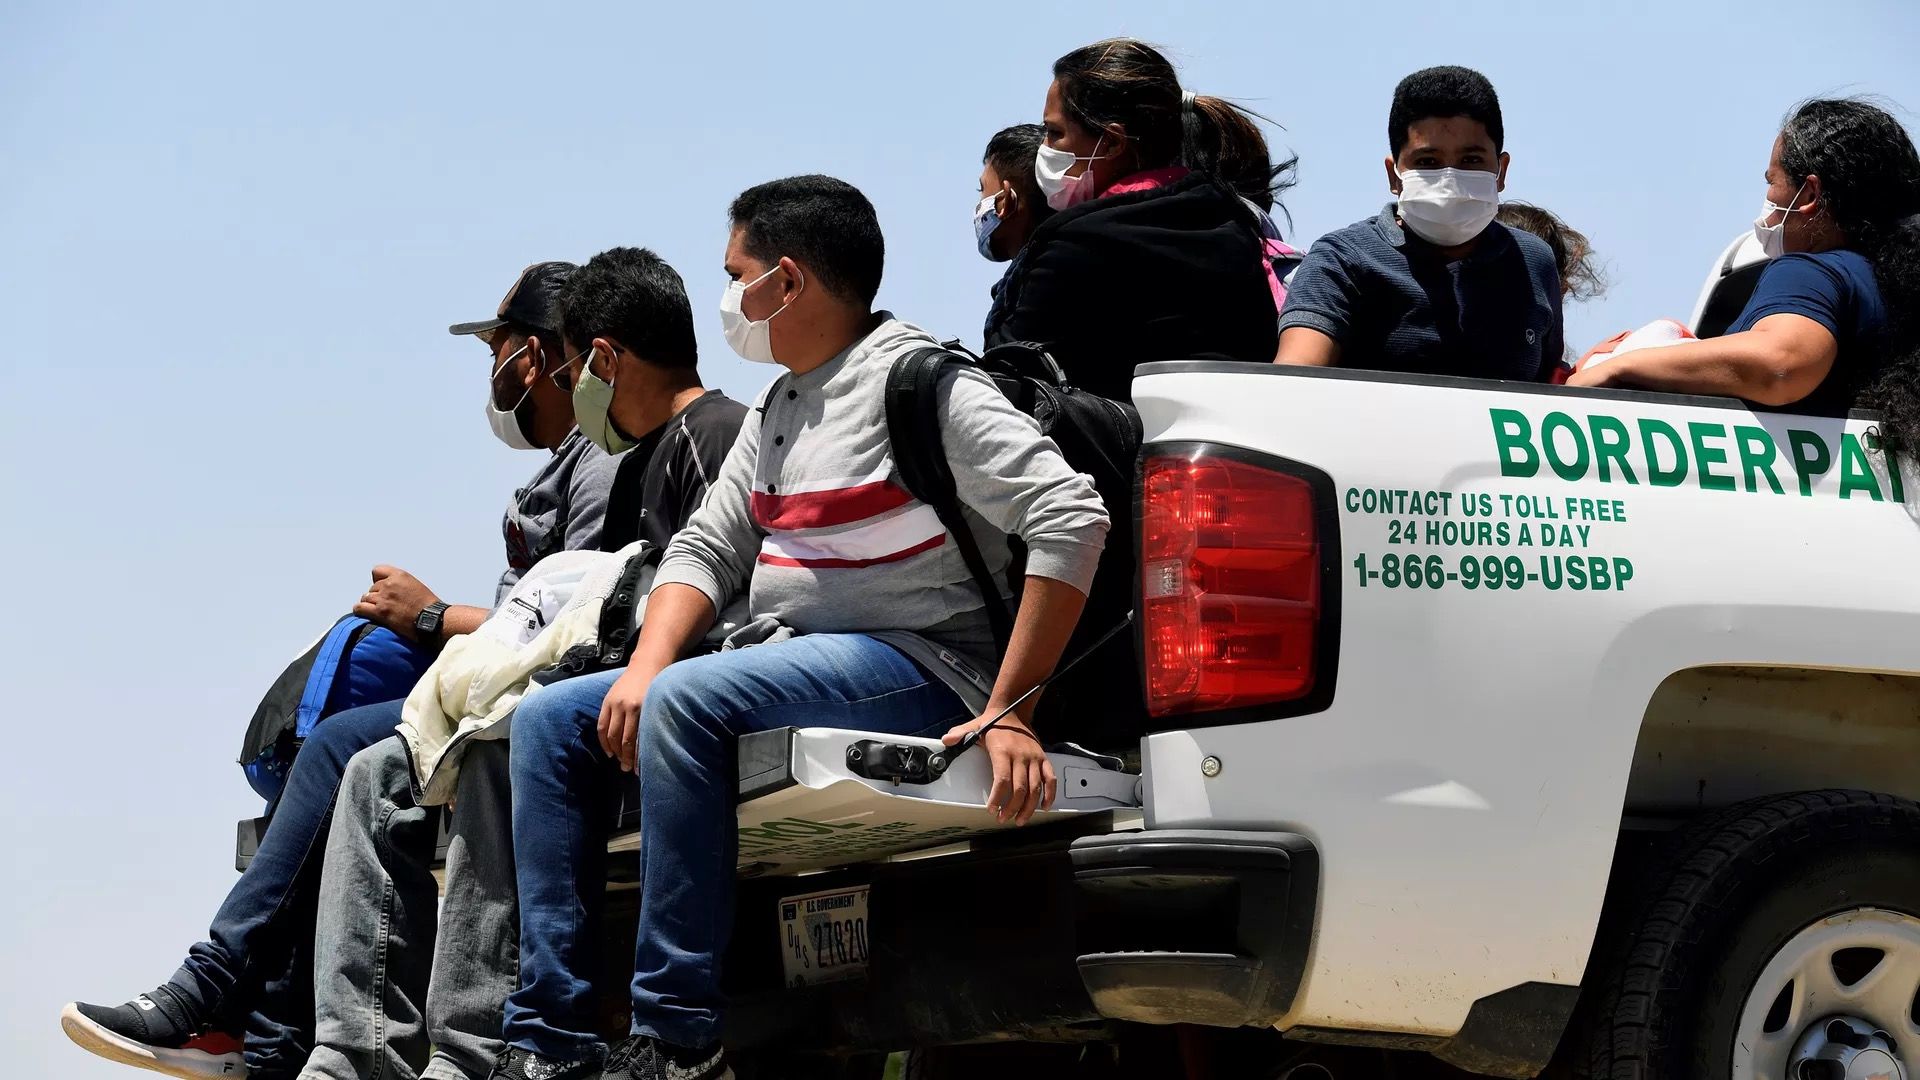 Migrants are seen in Border Patrol custody after illegally crossing the U.S.-Mexico border.